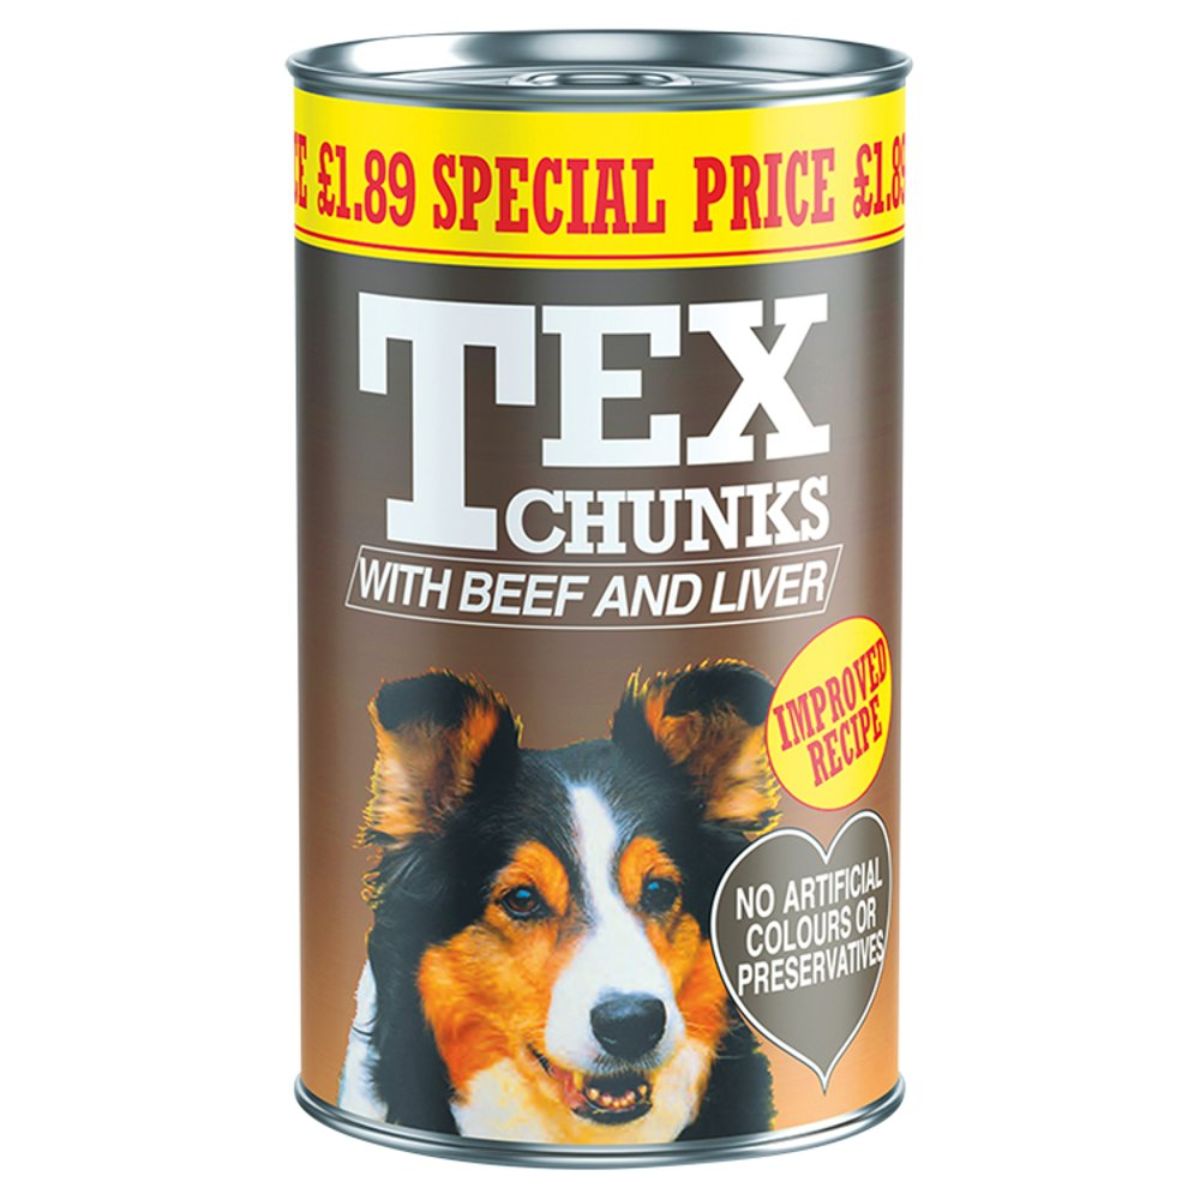 A can of Tex - Chunks with Beef & Liver - 1.2kg.